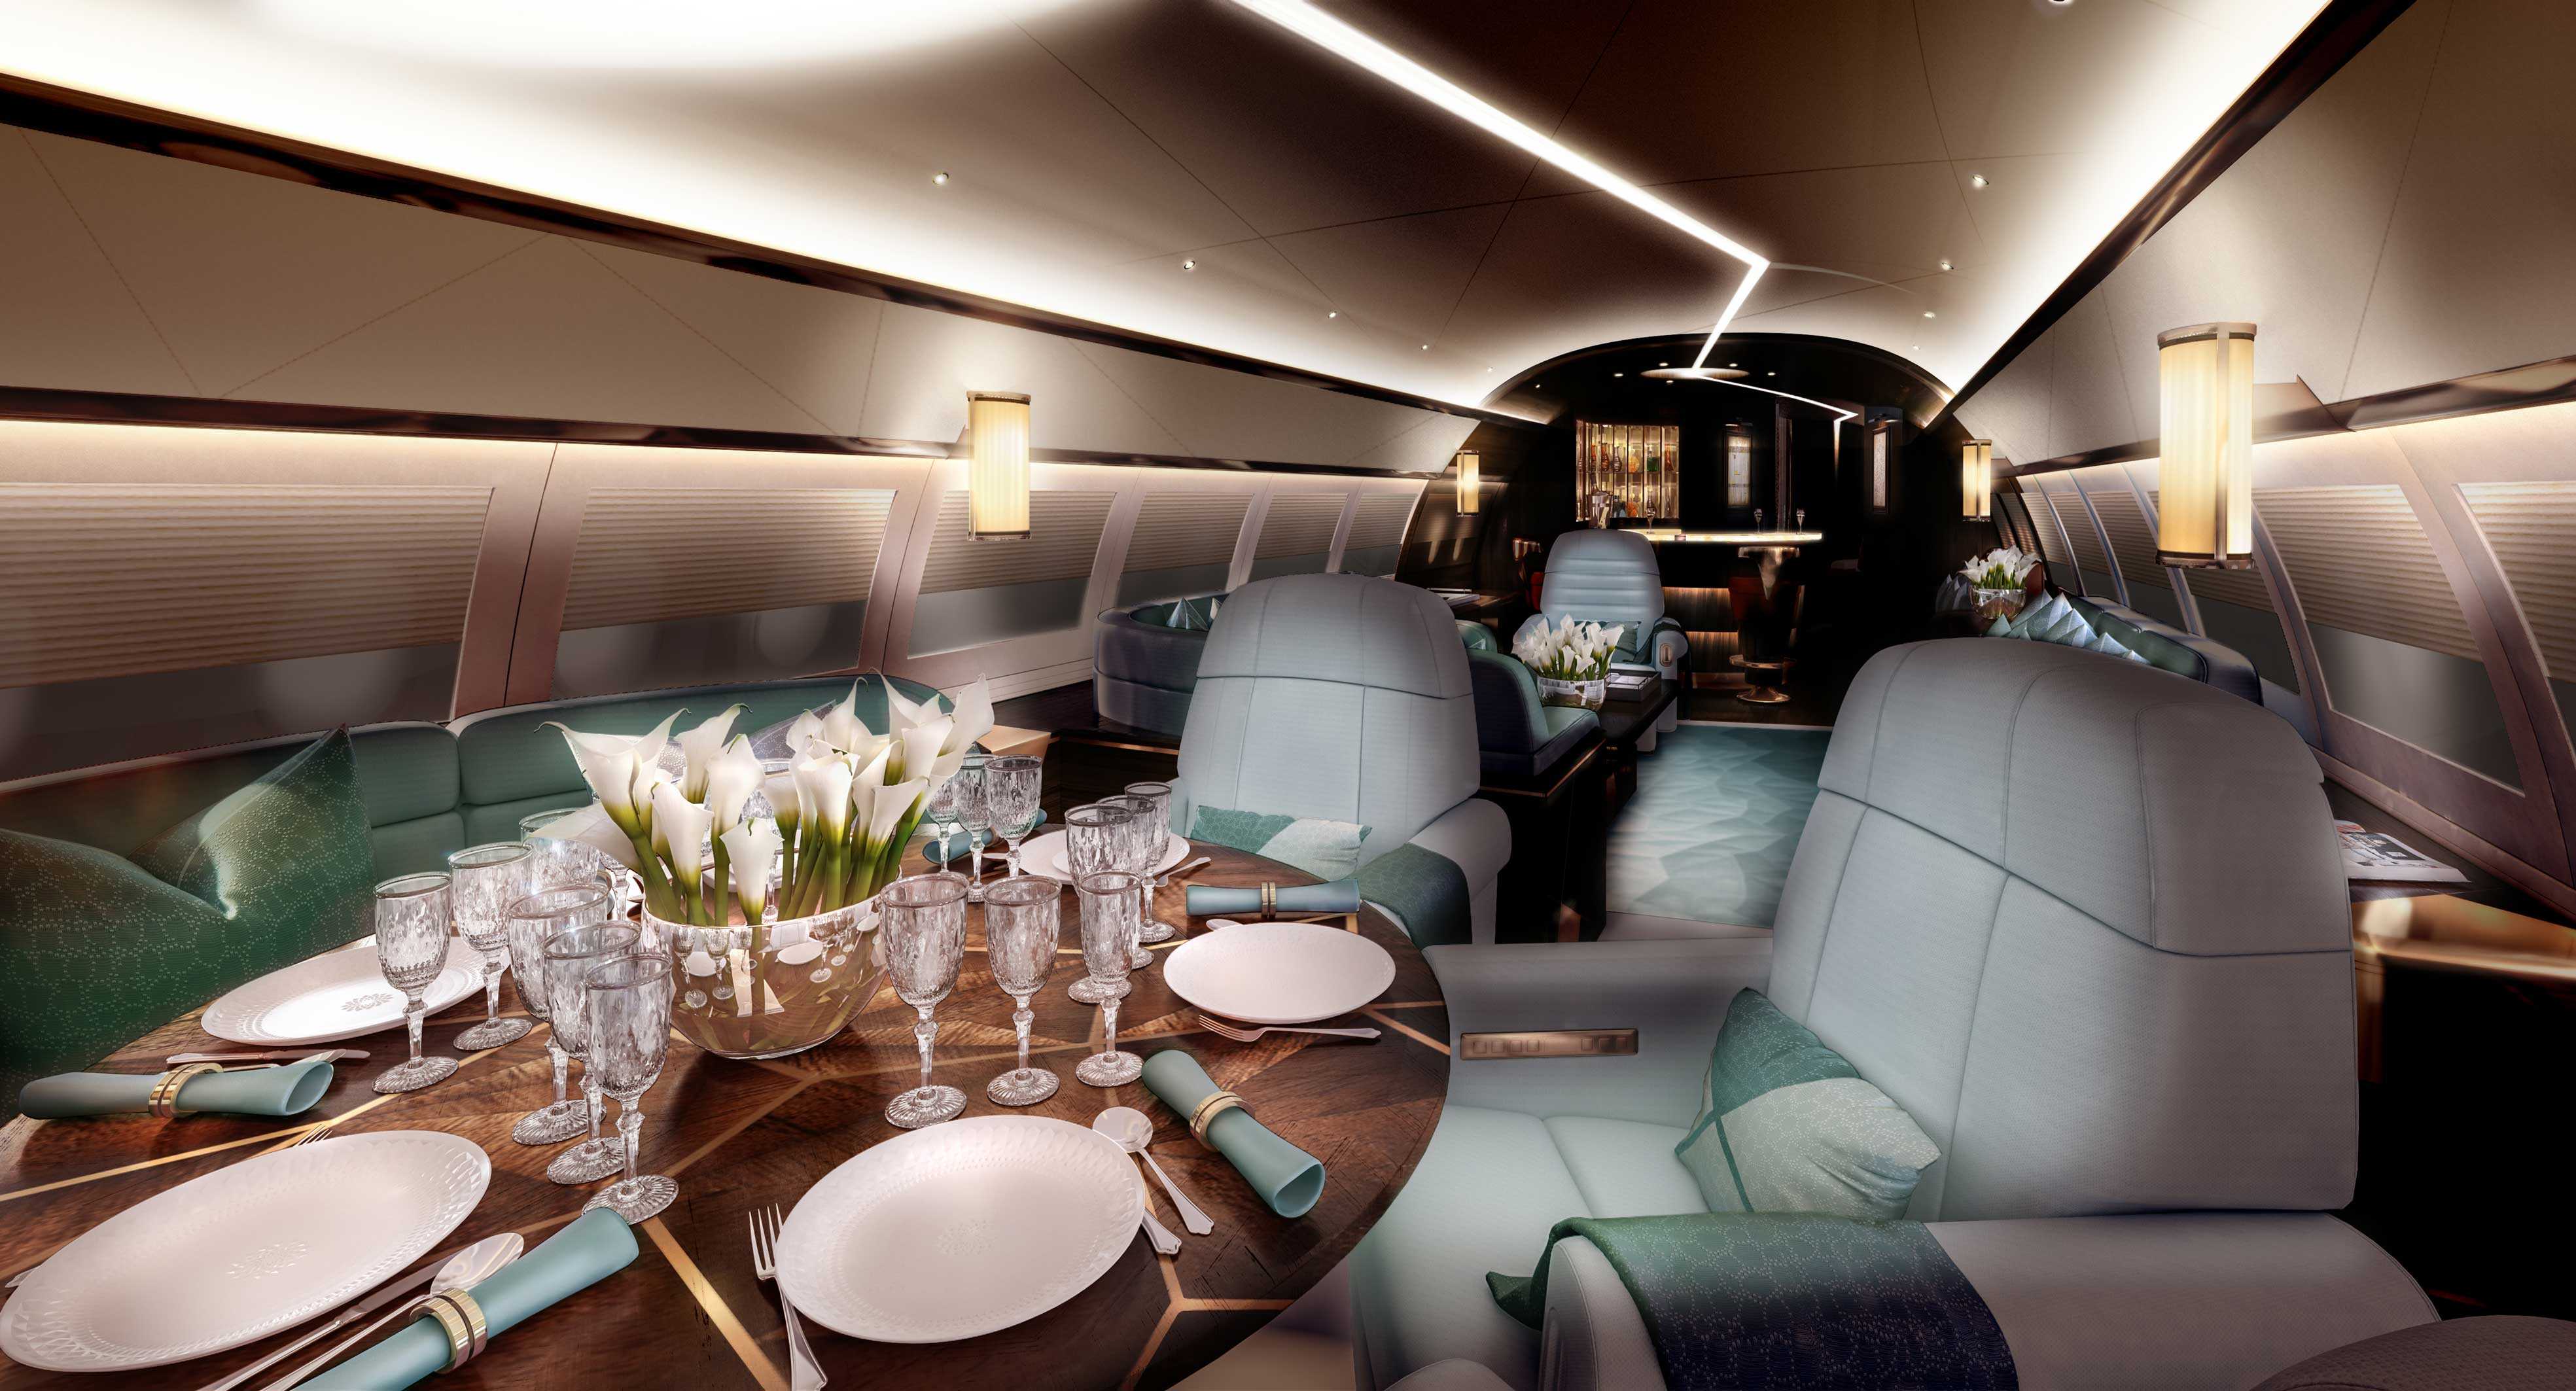 “Mayfair” Private Jet Concept